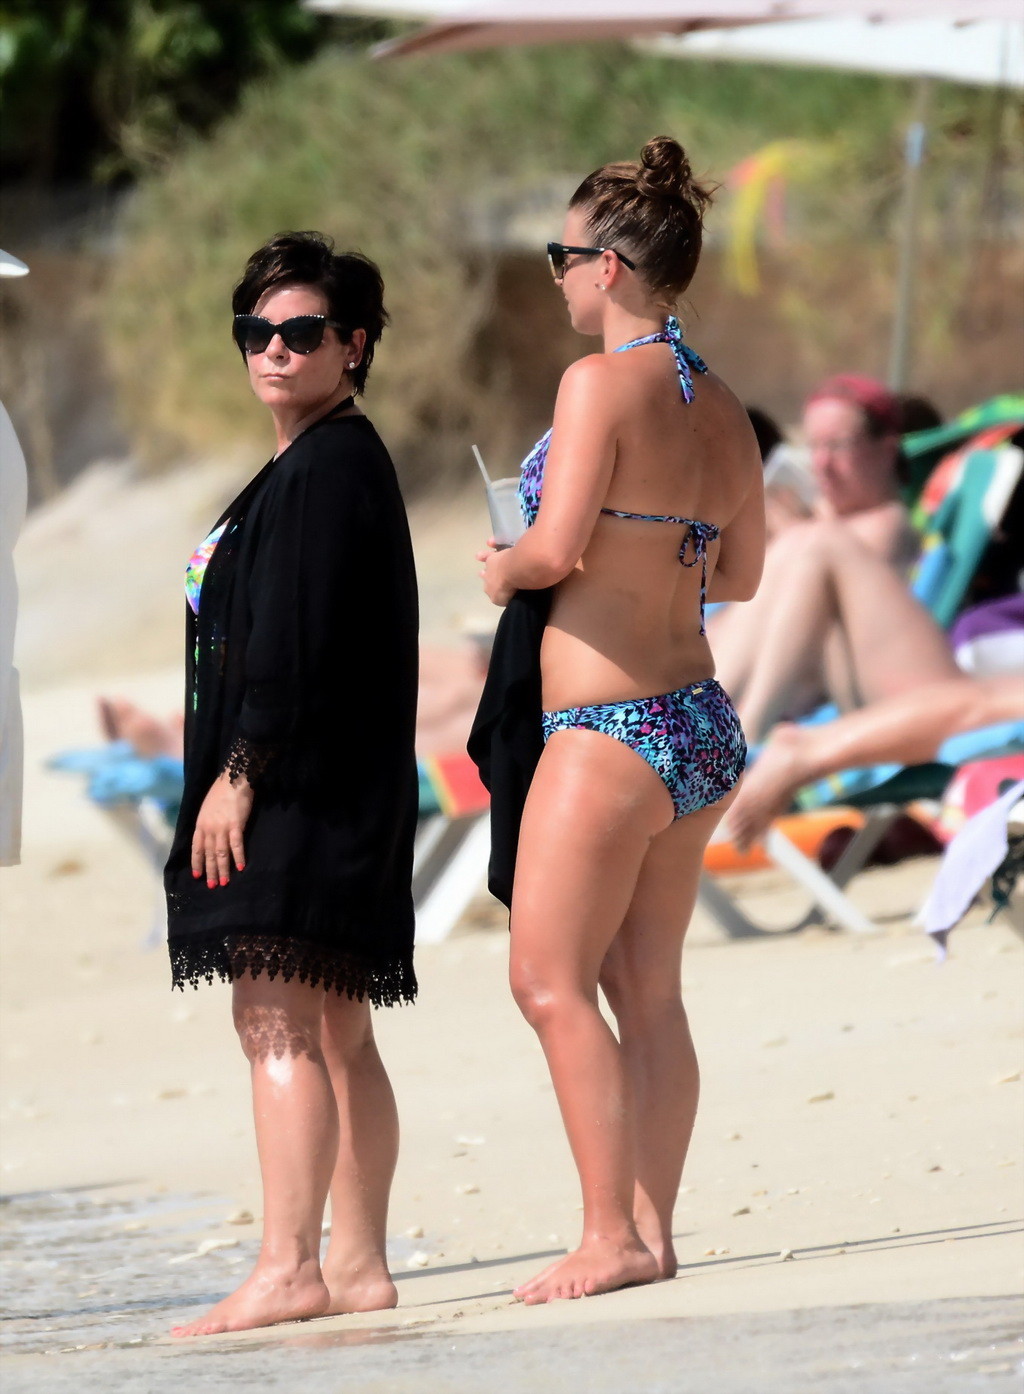 Coleen Rooney showing off her curvy body in a skimpy blue bikini at the beach in #75171738